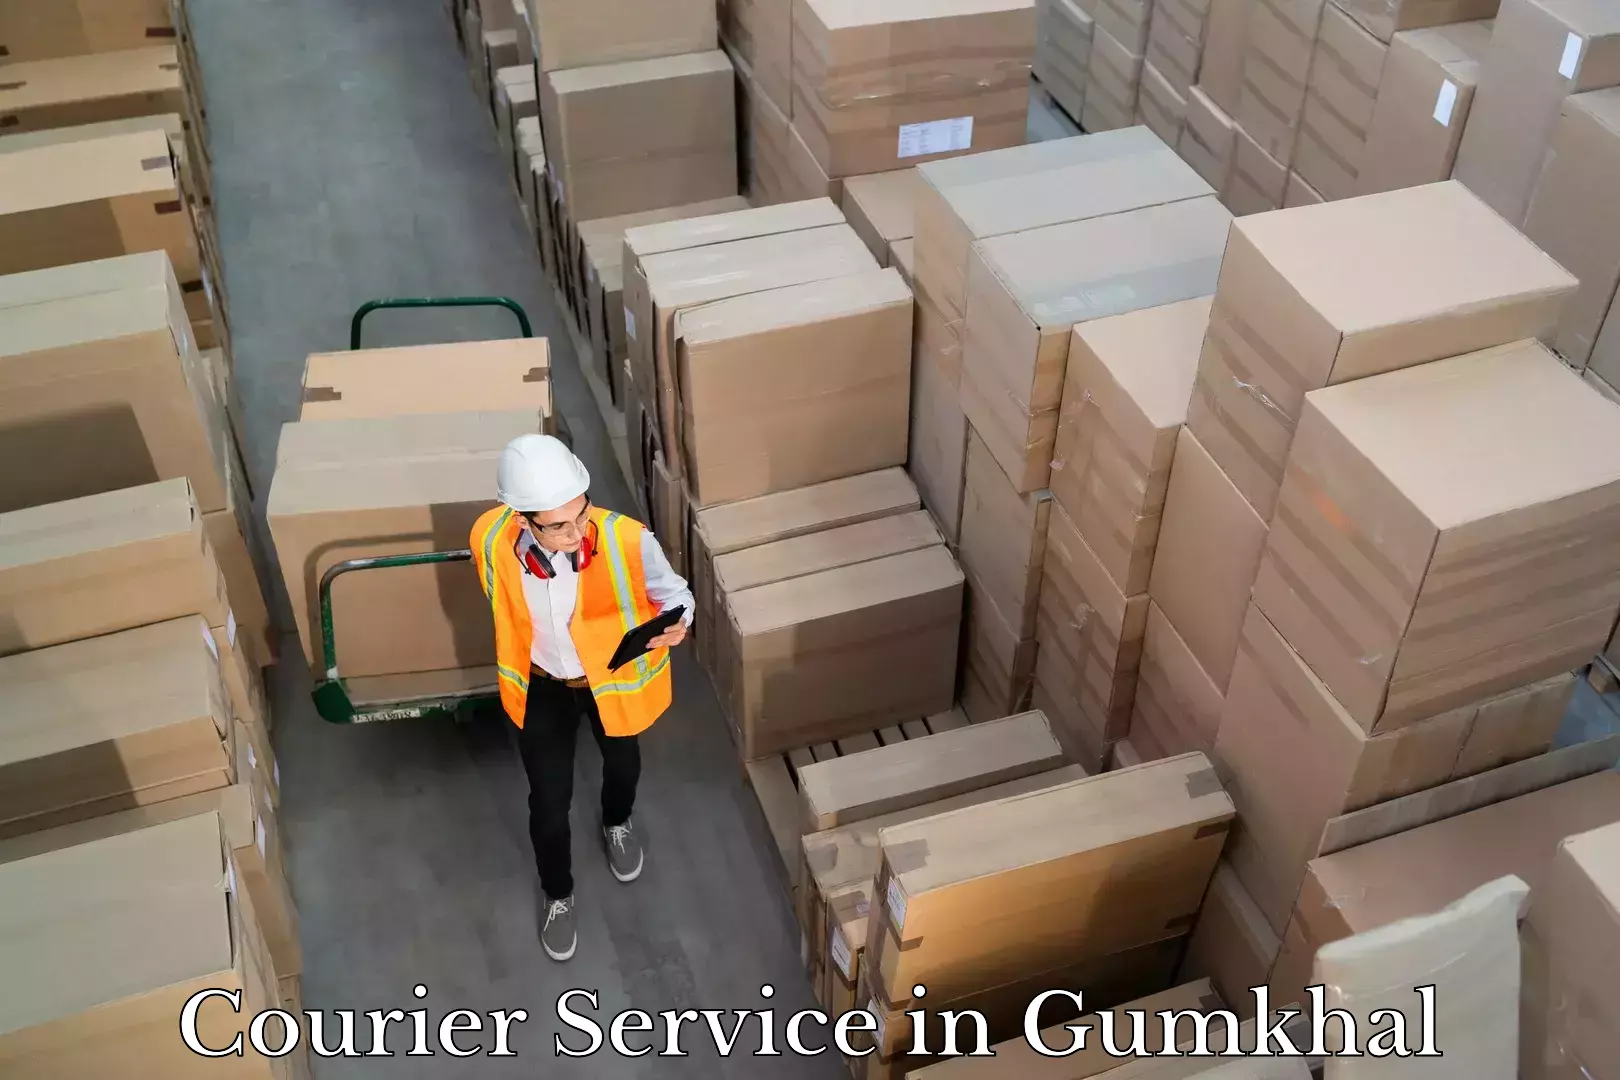 Streamlined delivery processes in Gumkhal